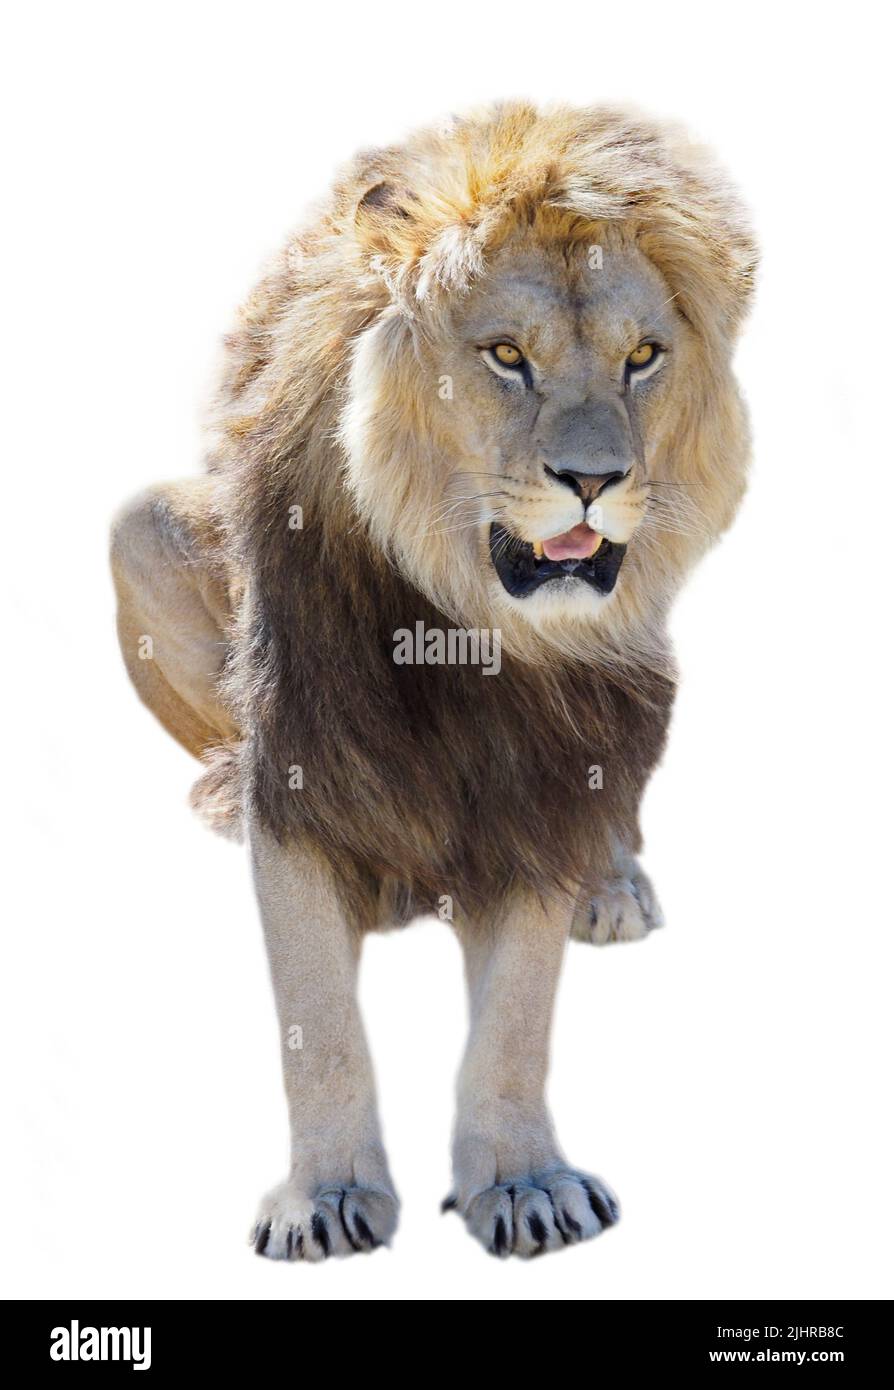 Lion seen from front  (Panthera leo) and sticking out your tongue, isolated on white background Stock Photo